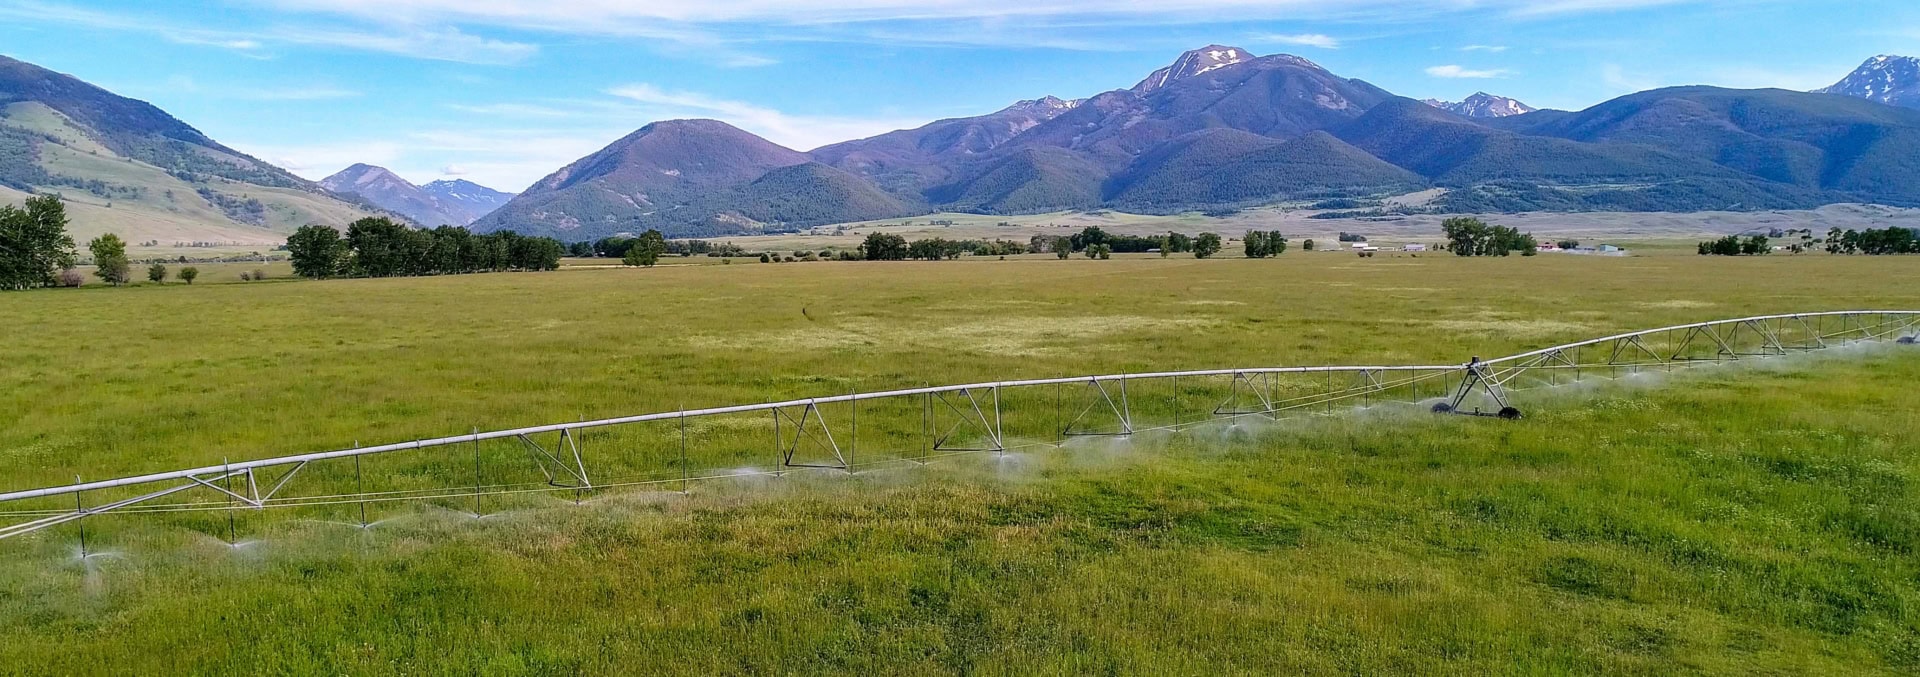 montana agricultural property for sale paradise valley farm